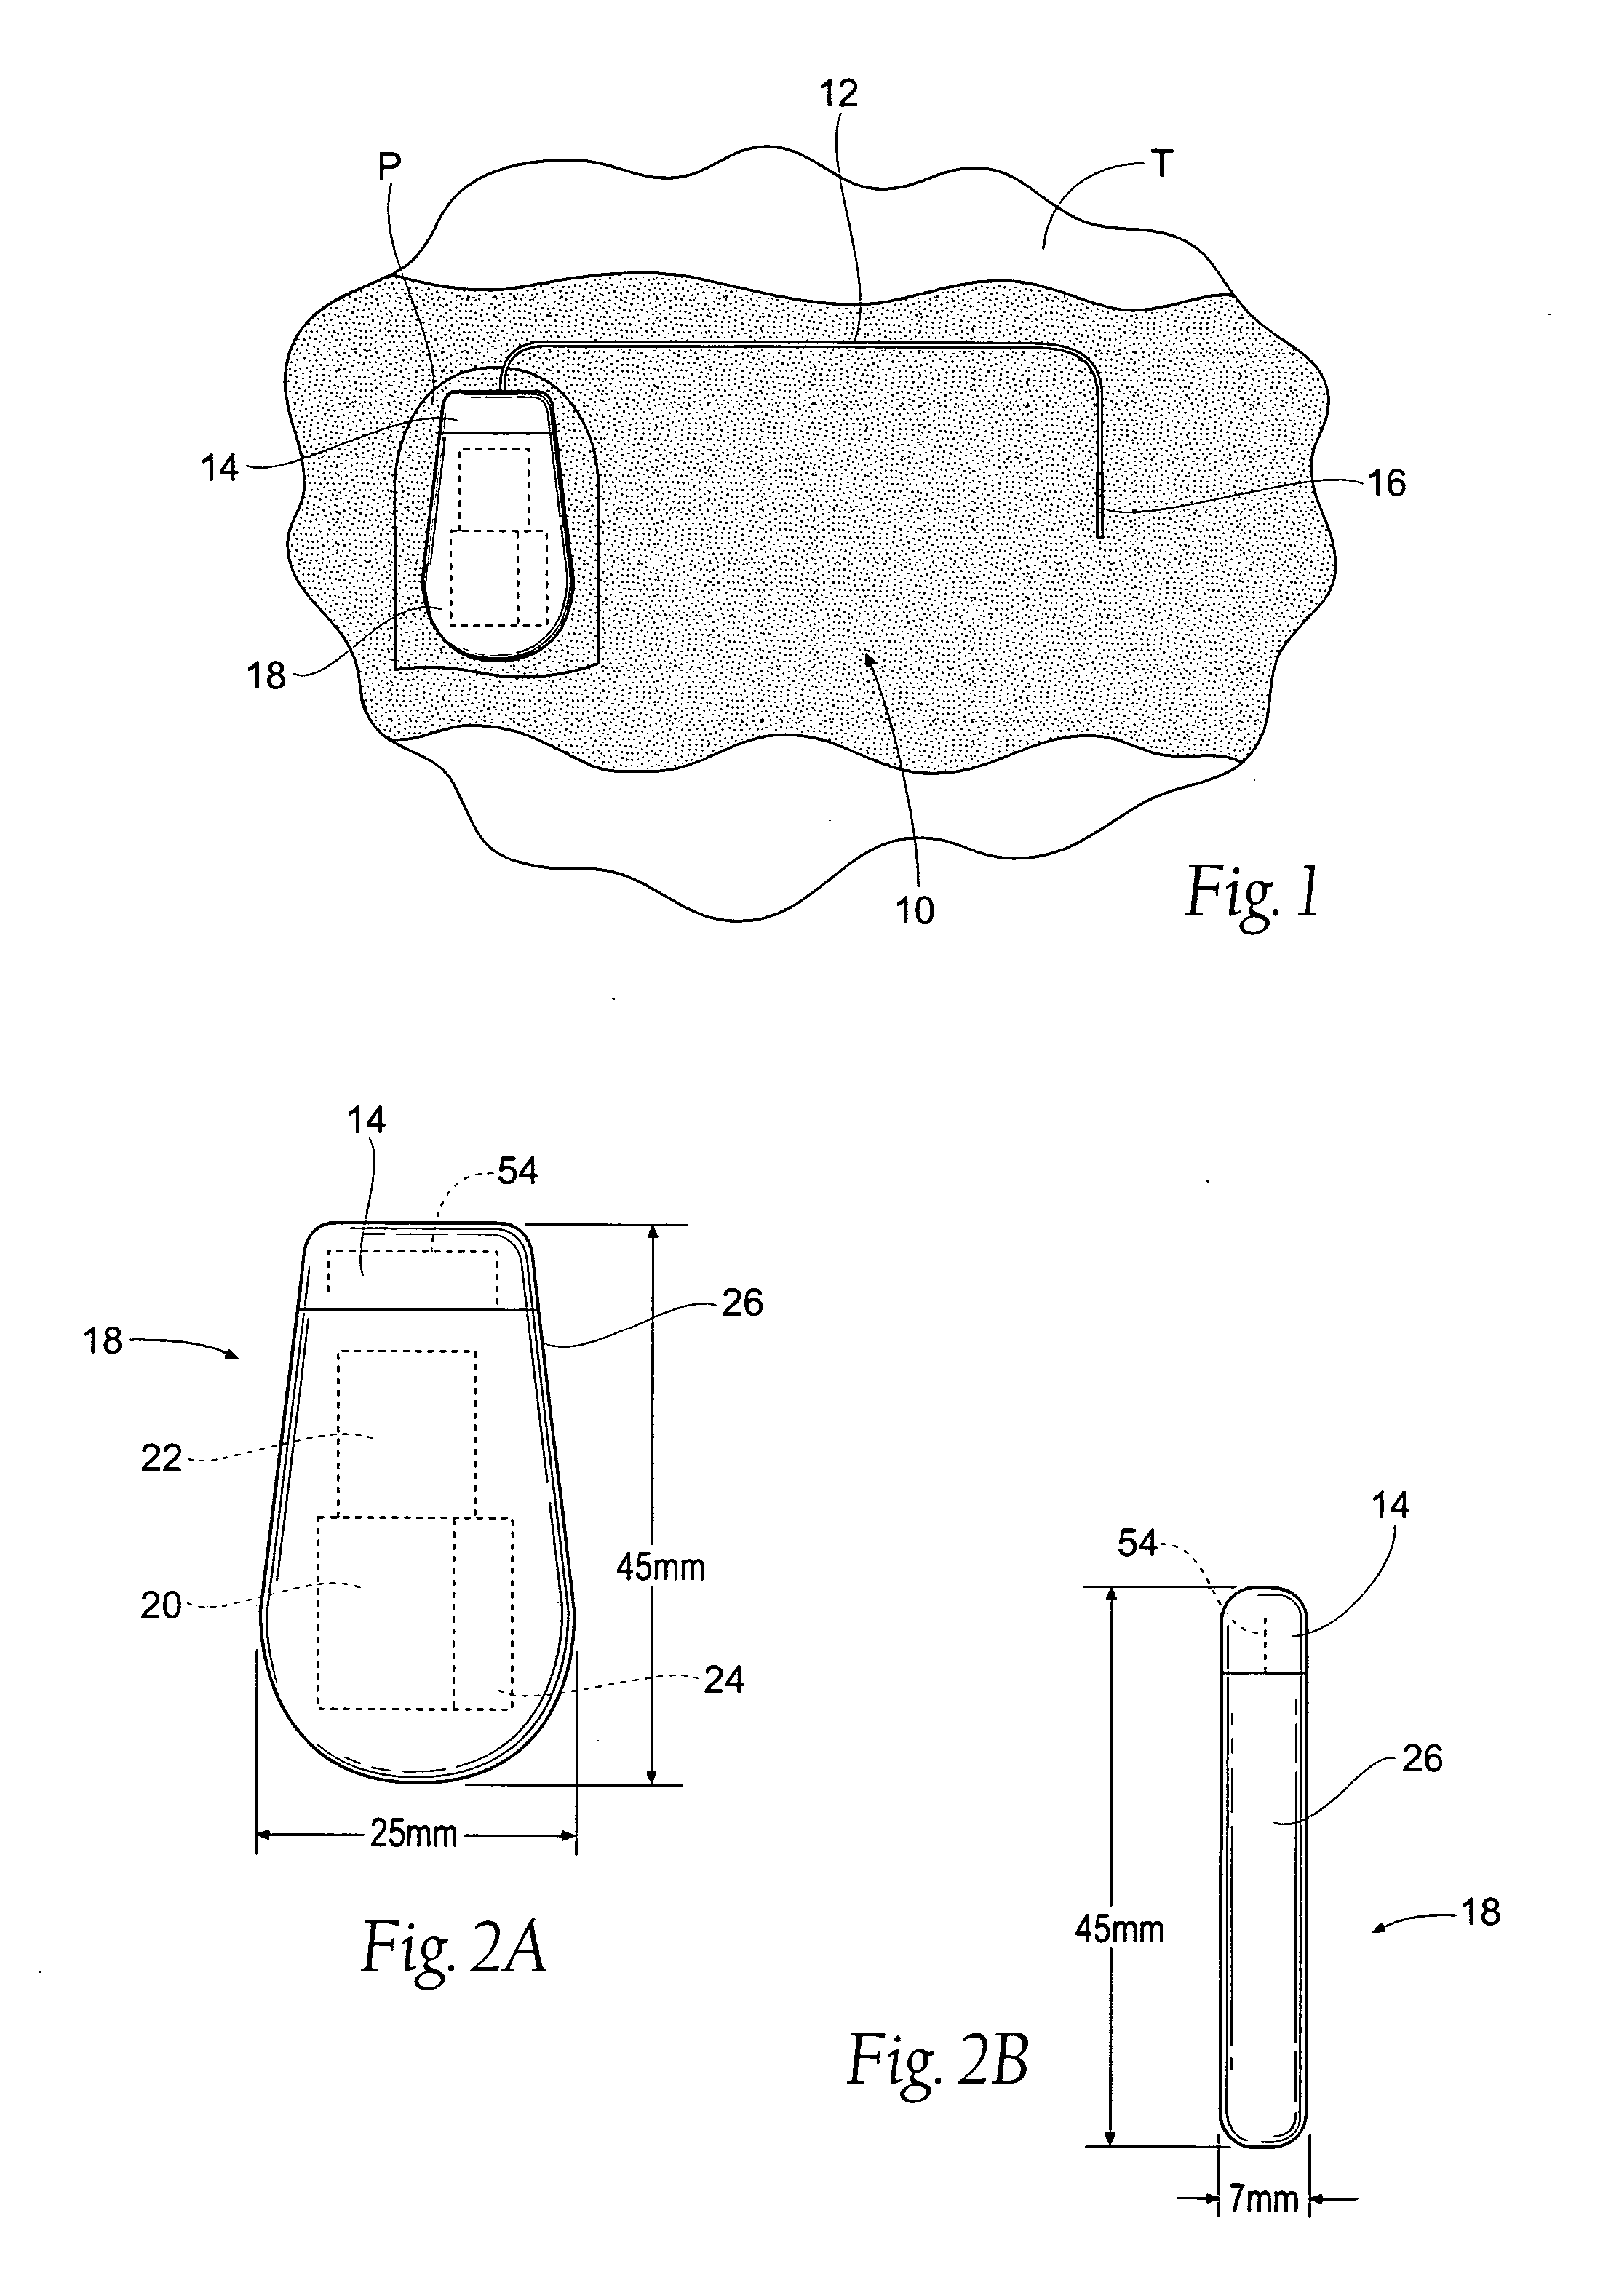 Implantable pulse generator for providing functional and/or therapeutic stimulation of muscles and /or nerves and/or central nervous system tissue